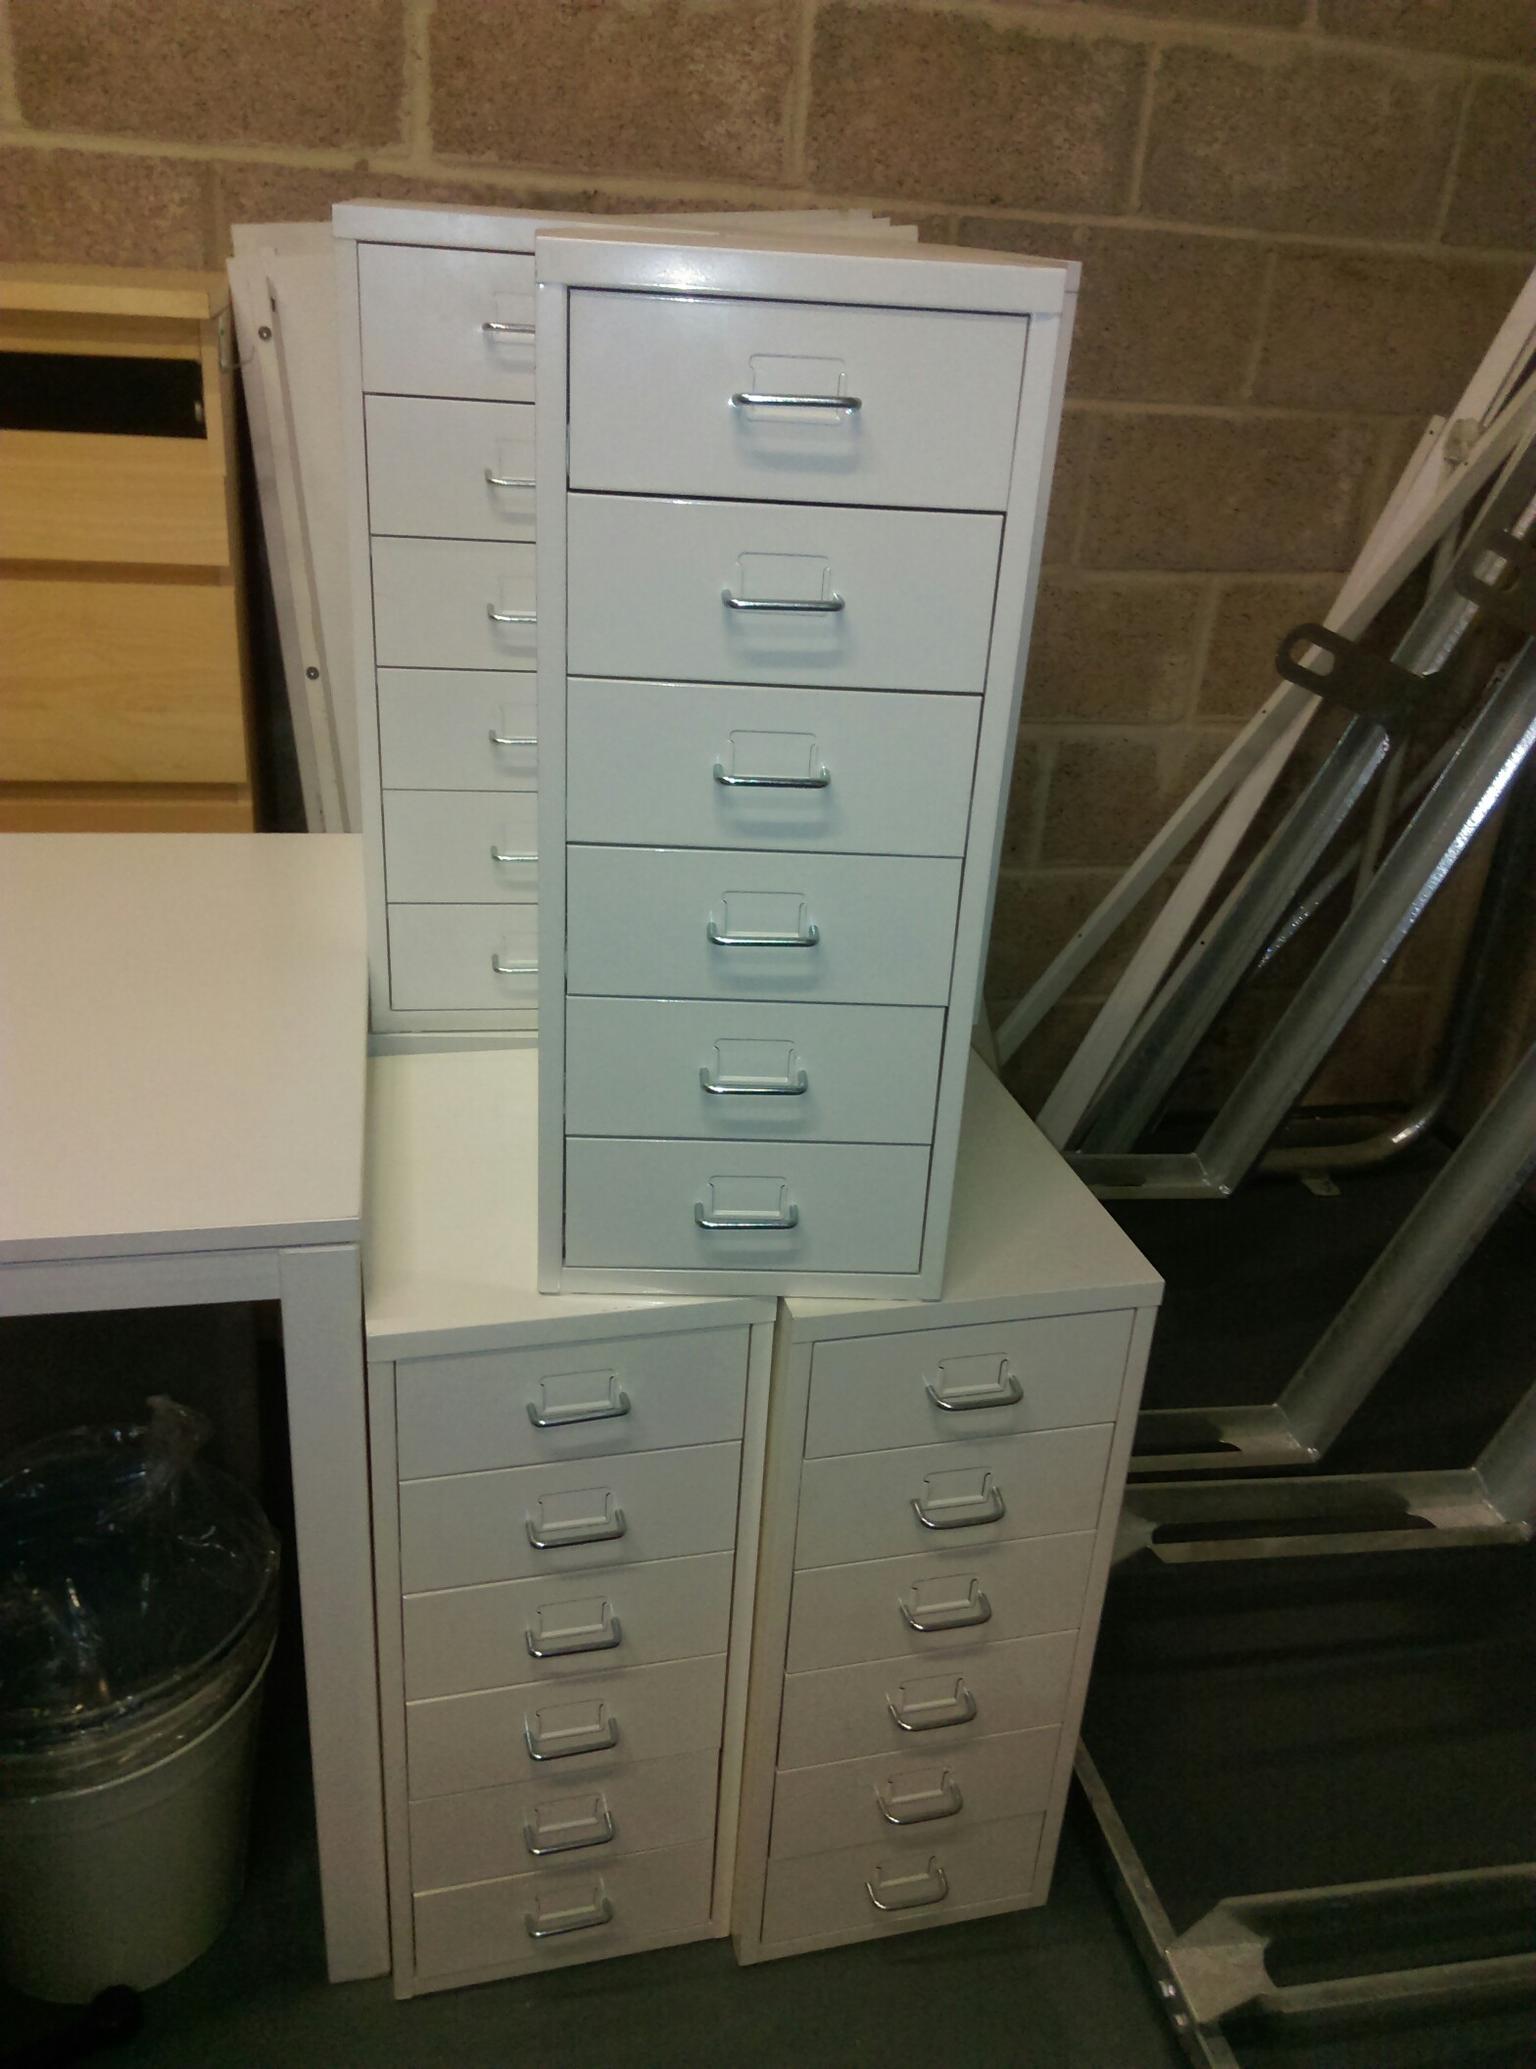 File Cabinets Storage For Sale Man And Van In Nw8 7pa London Fur